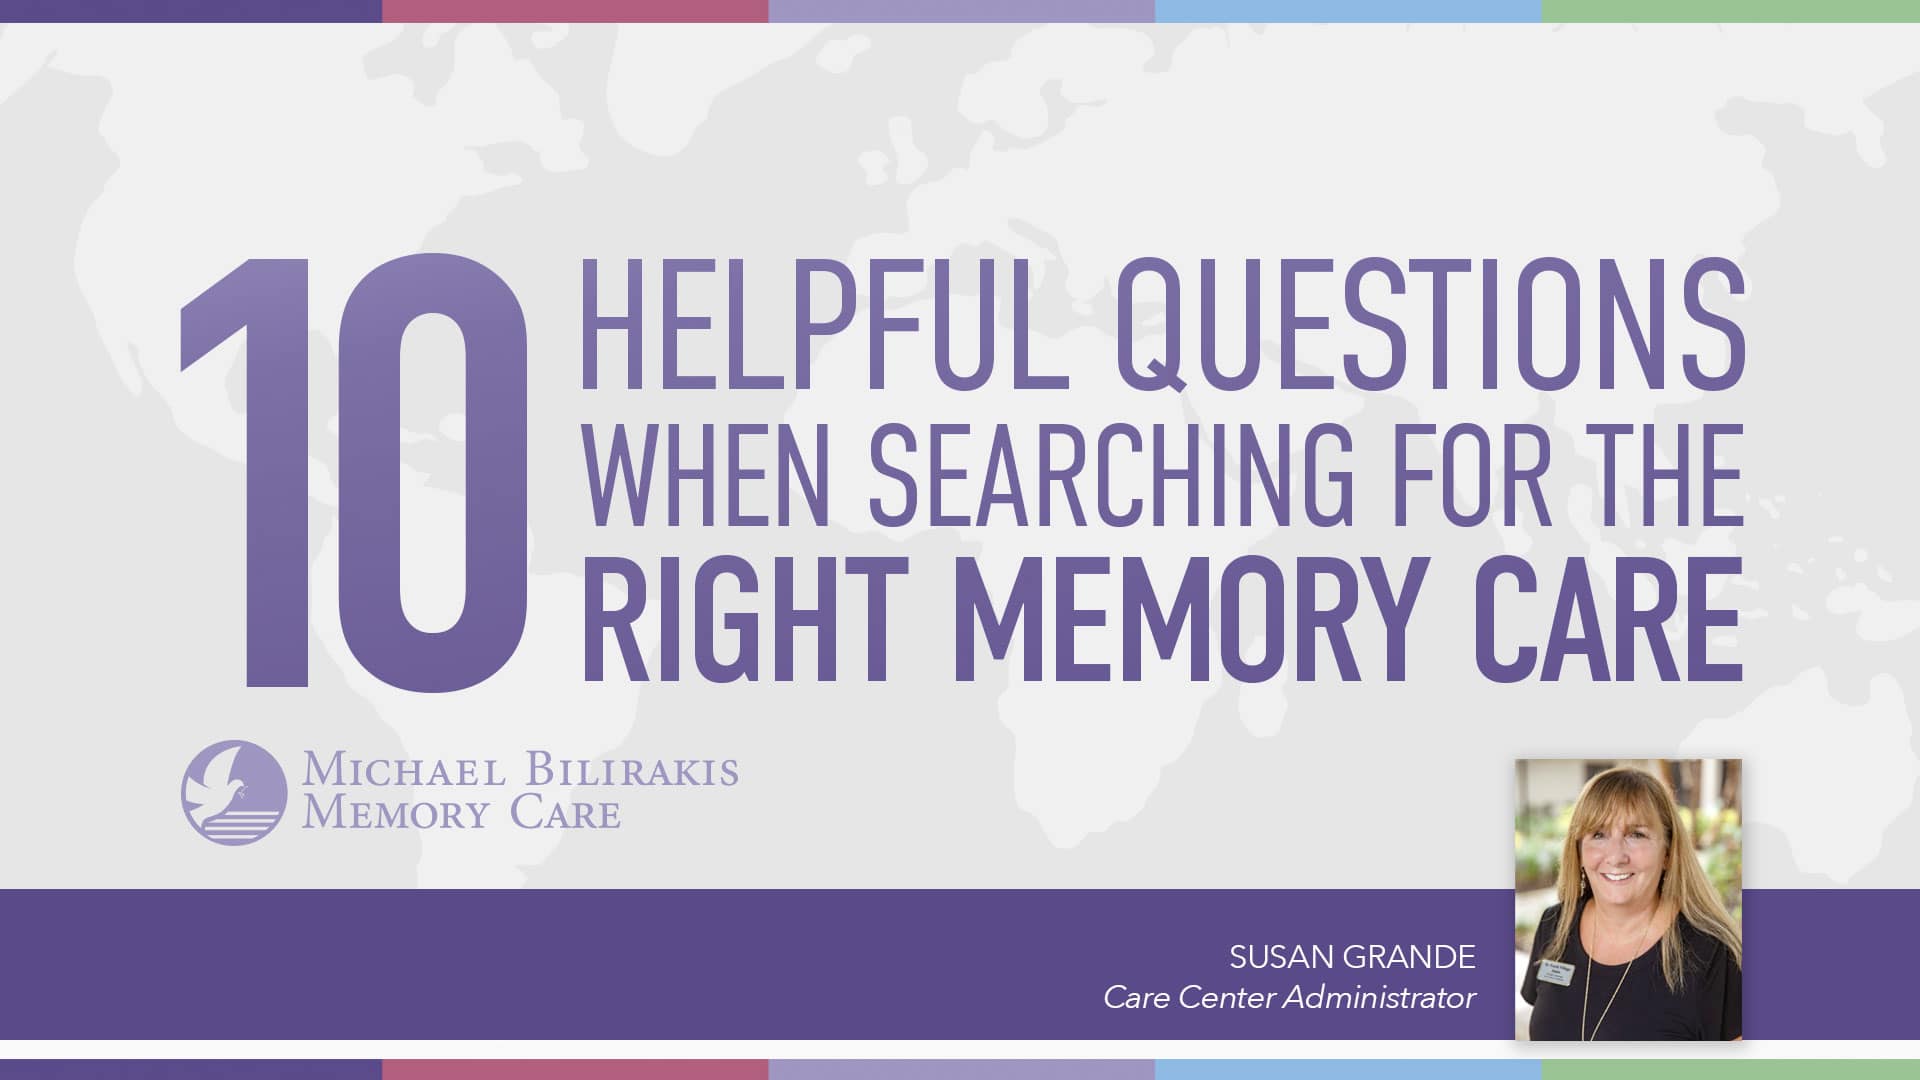 10 helpful questions when searching for the right memory care.